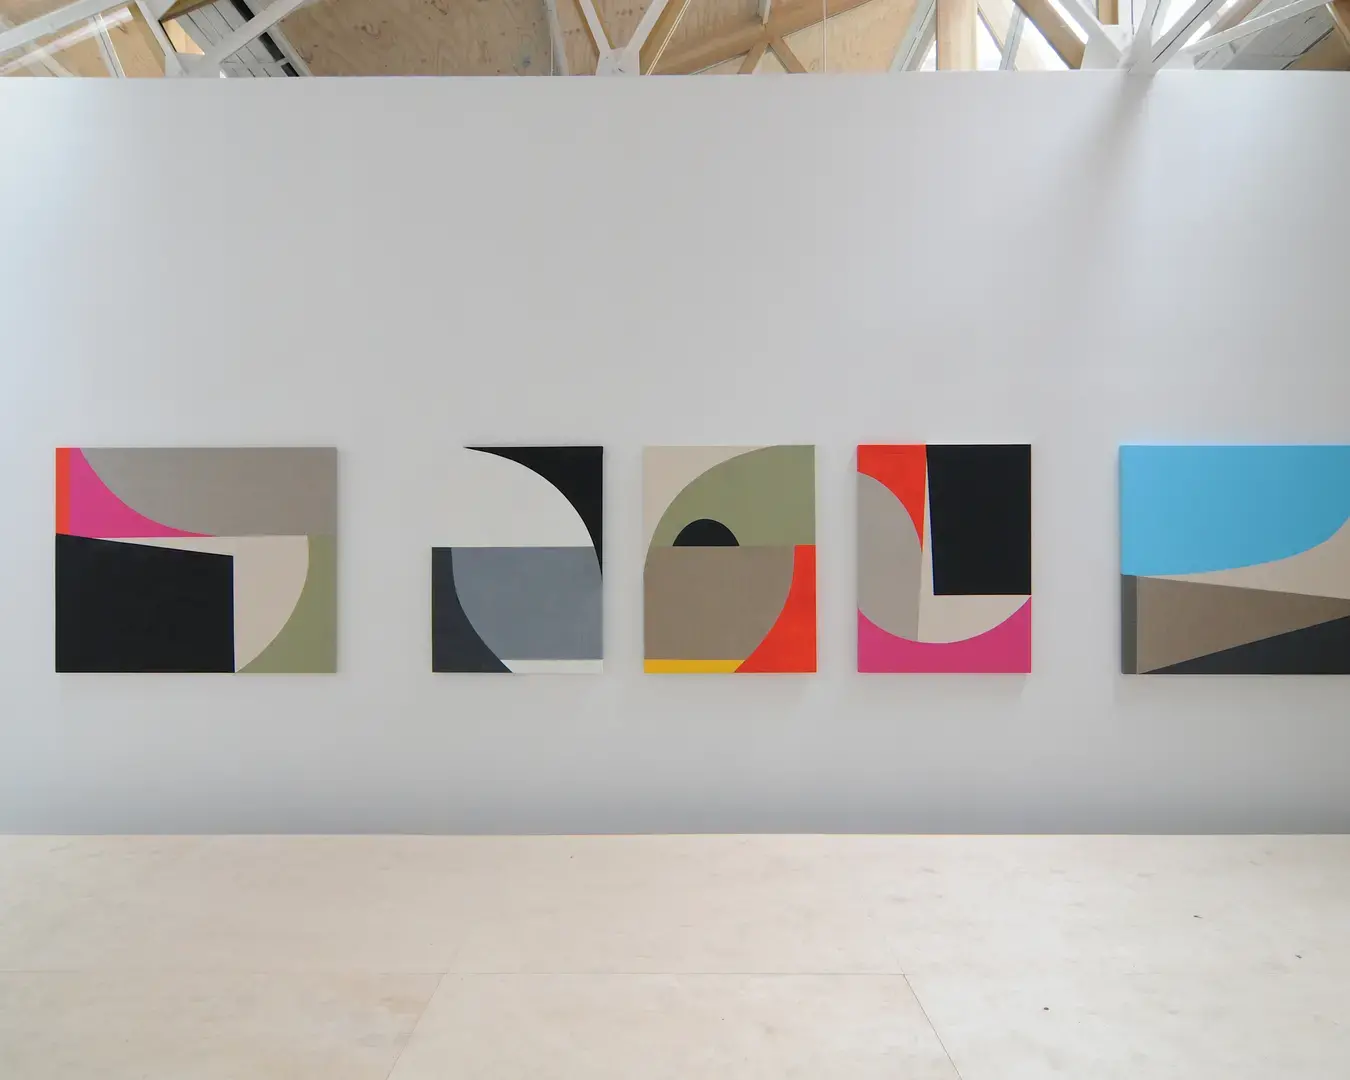 Sarah Crowner, Ballet Plastique, 2011, oil and acrylic on raw canvas and linen, dimensions variable. Installation view image courtesy Galerie Catherine Bastide, Brussels.&nbsp;